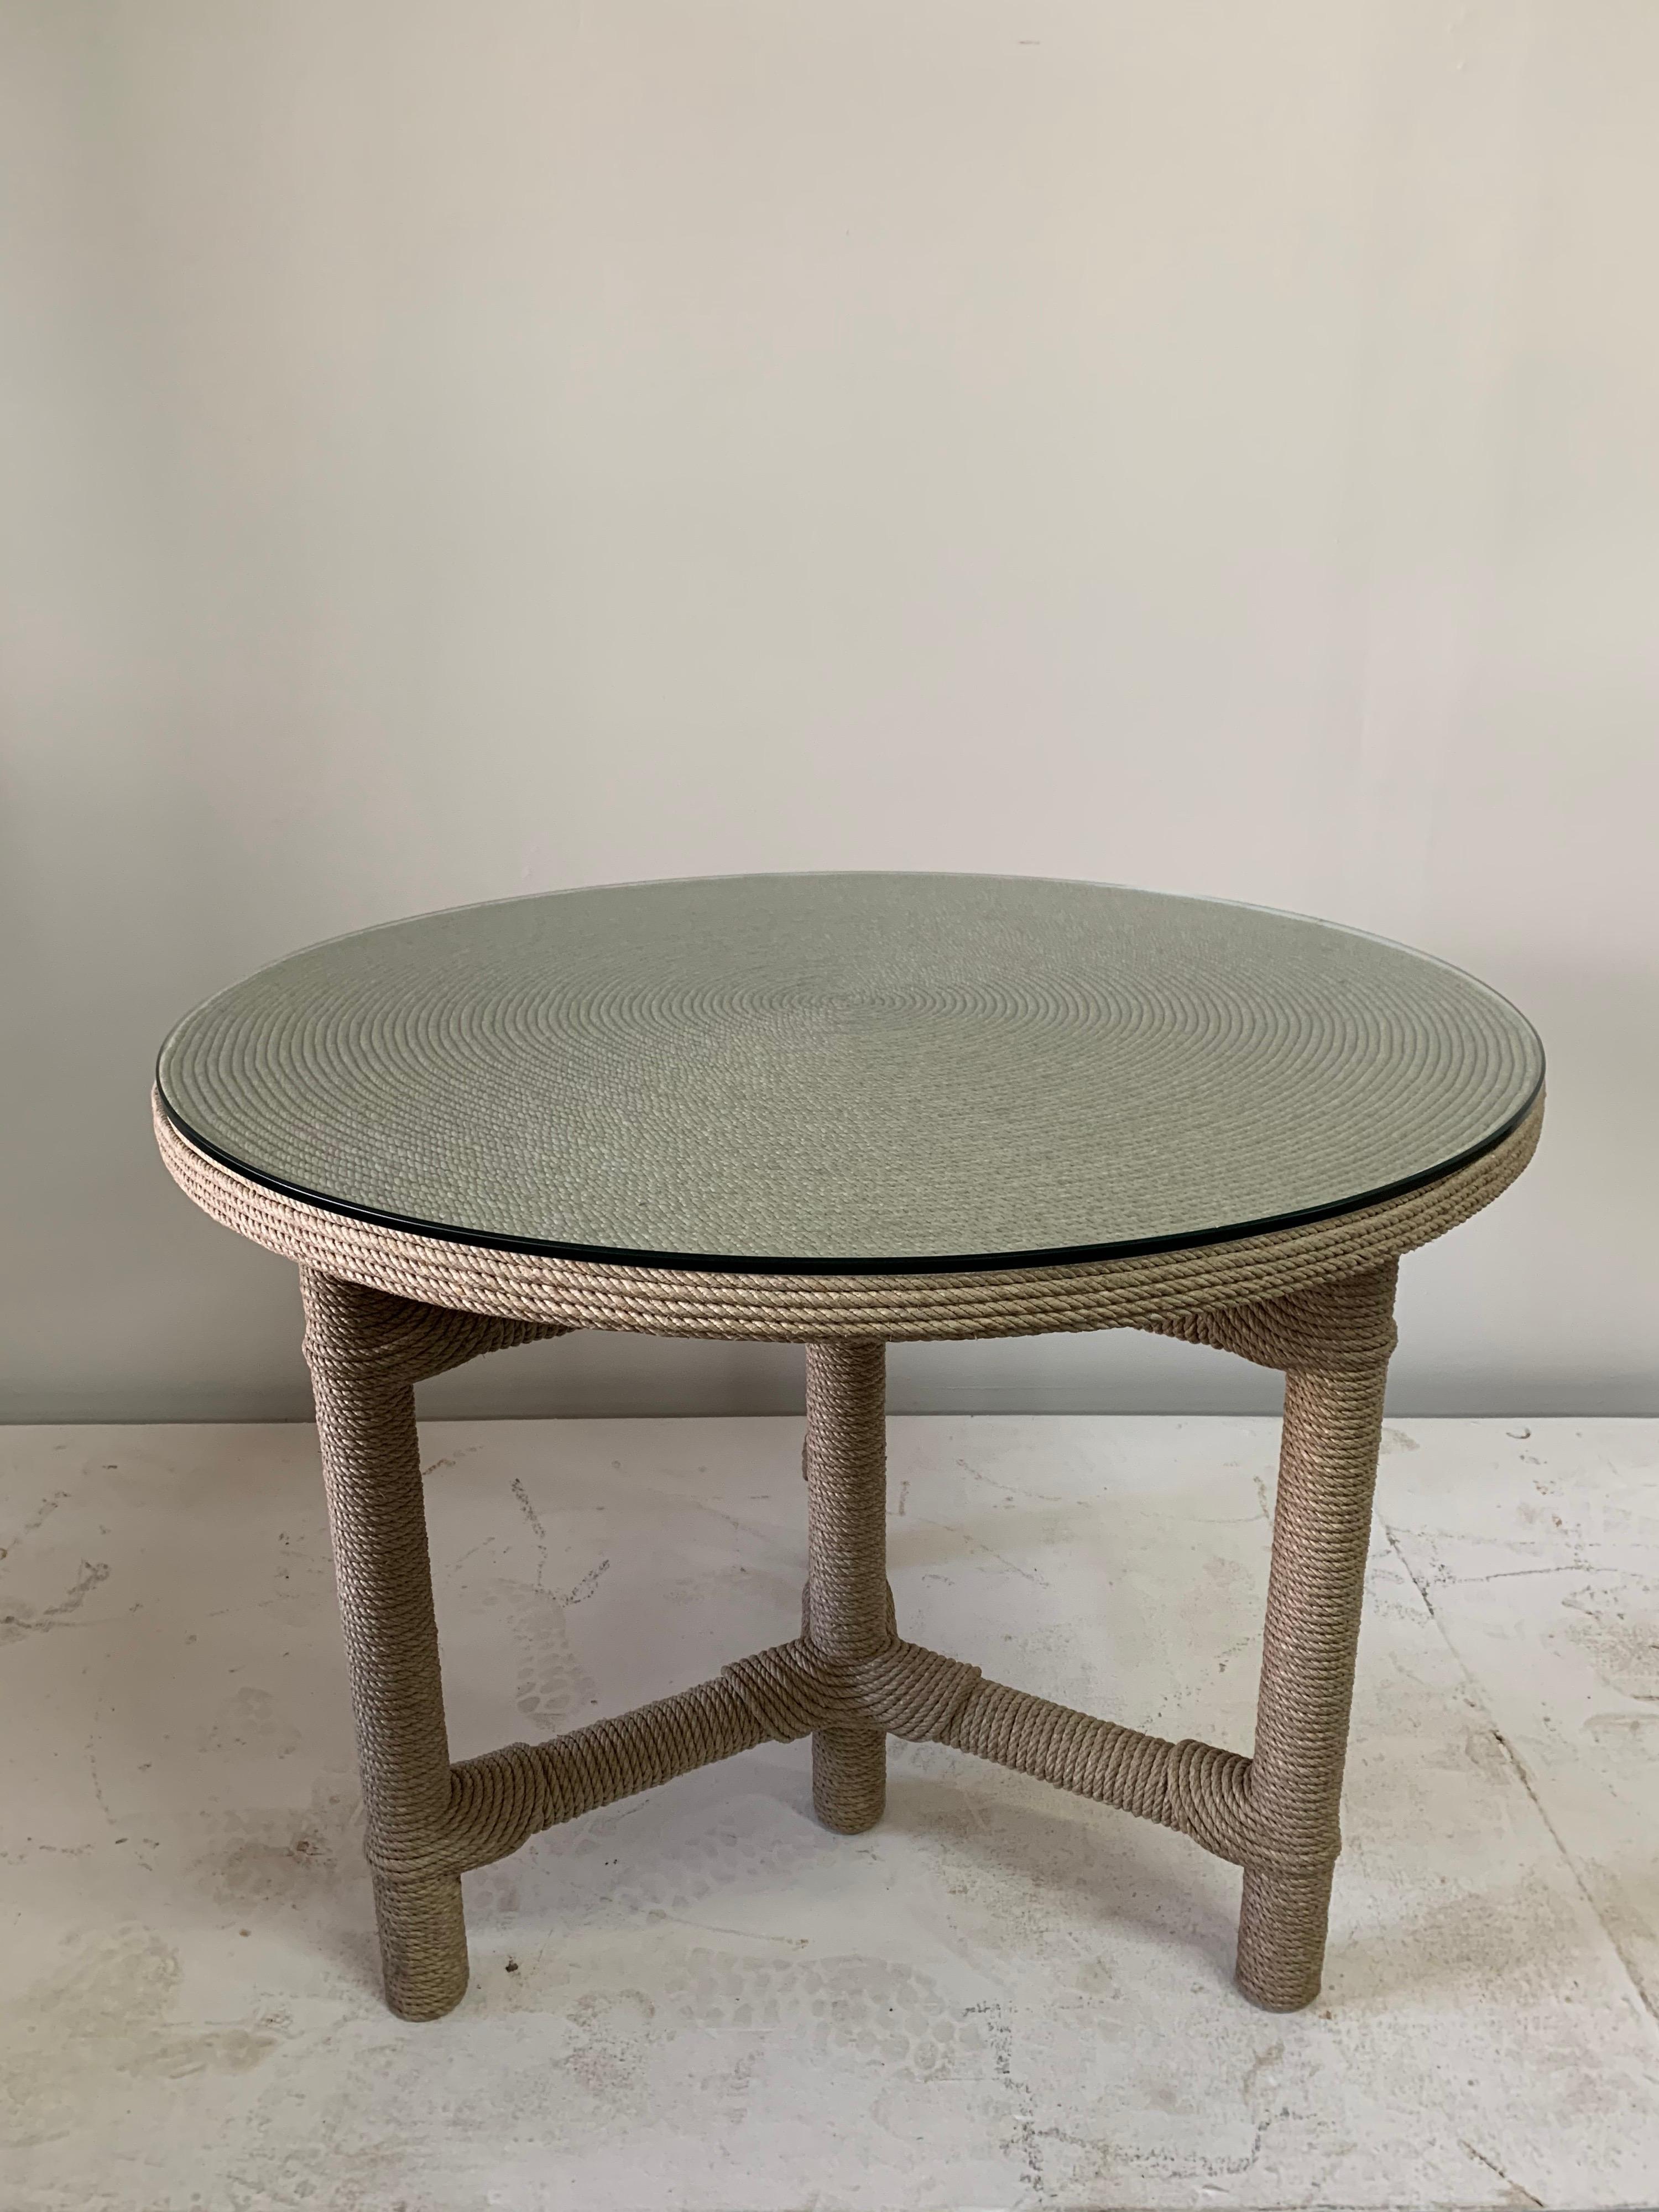 This rope cord covered table by famed Master artist Christian Astuguevieille, named the Arfiba table with original custom glass top protector. Natural colored cord and in fine vintage condition. Tribal notes to this design.

Note: Height of table